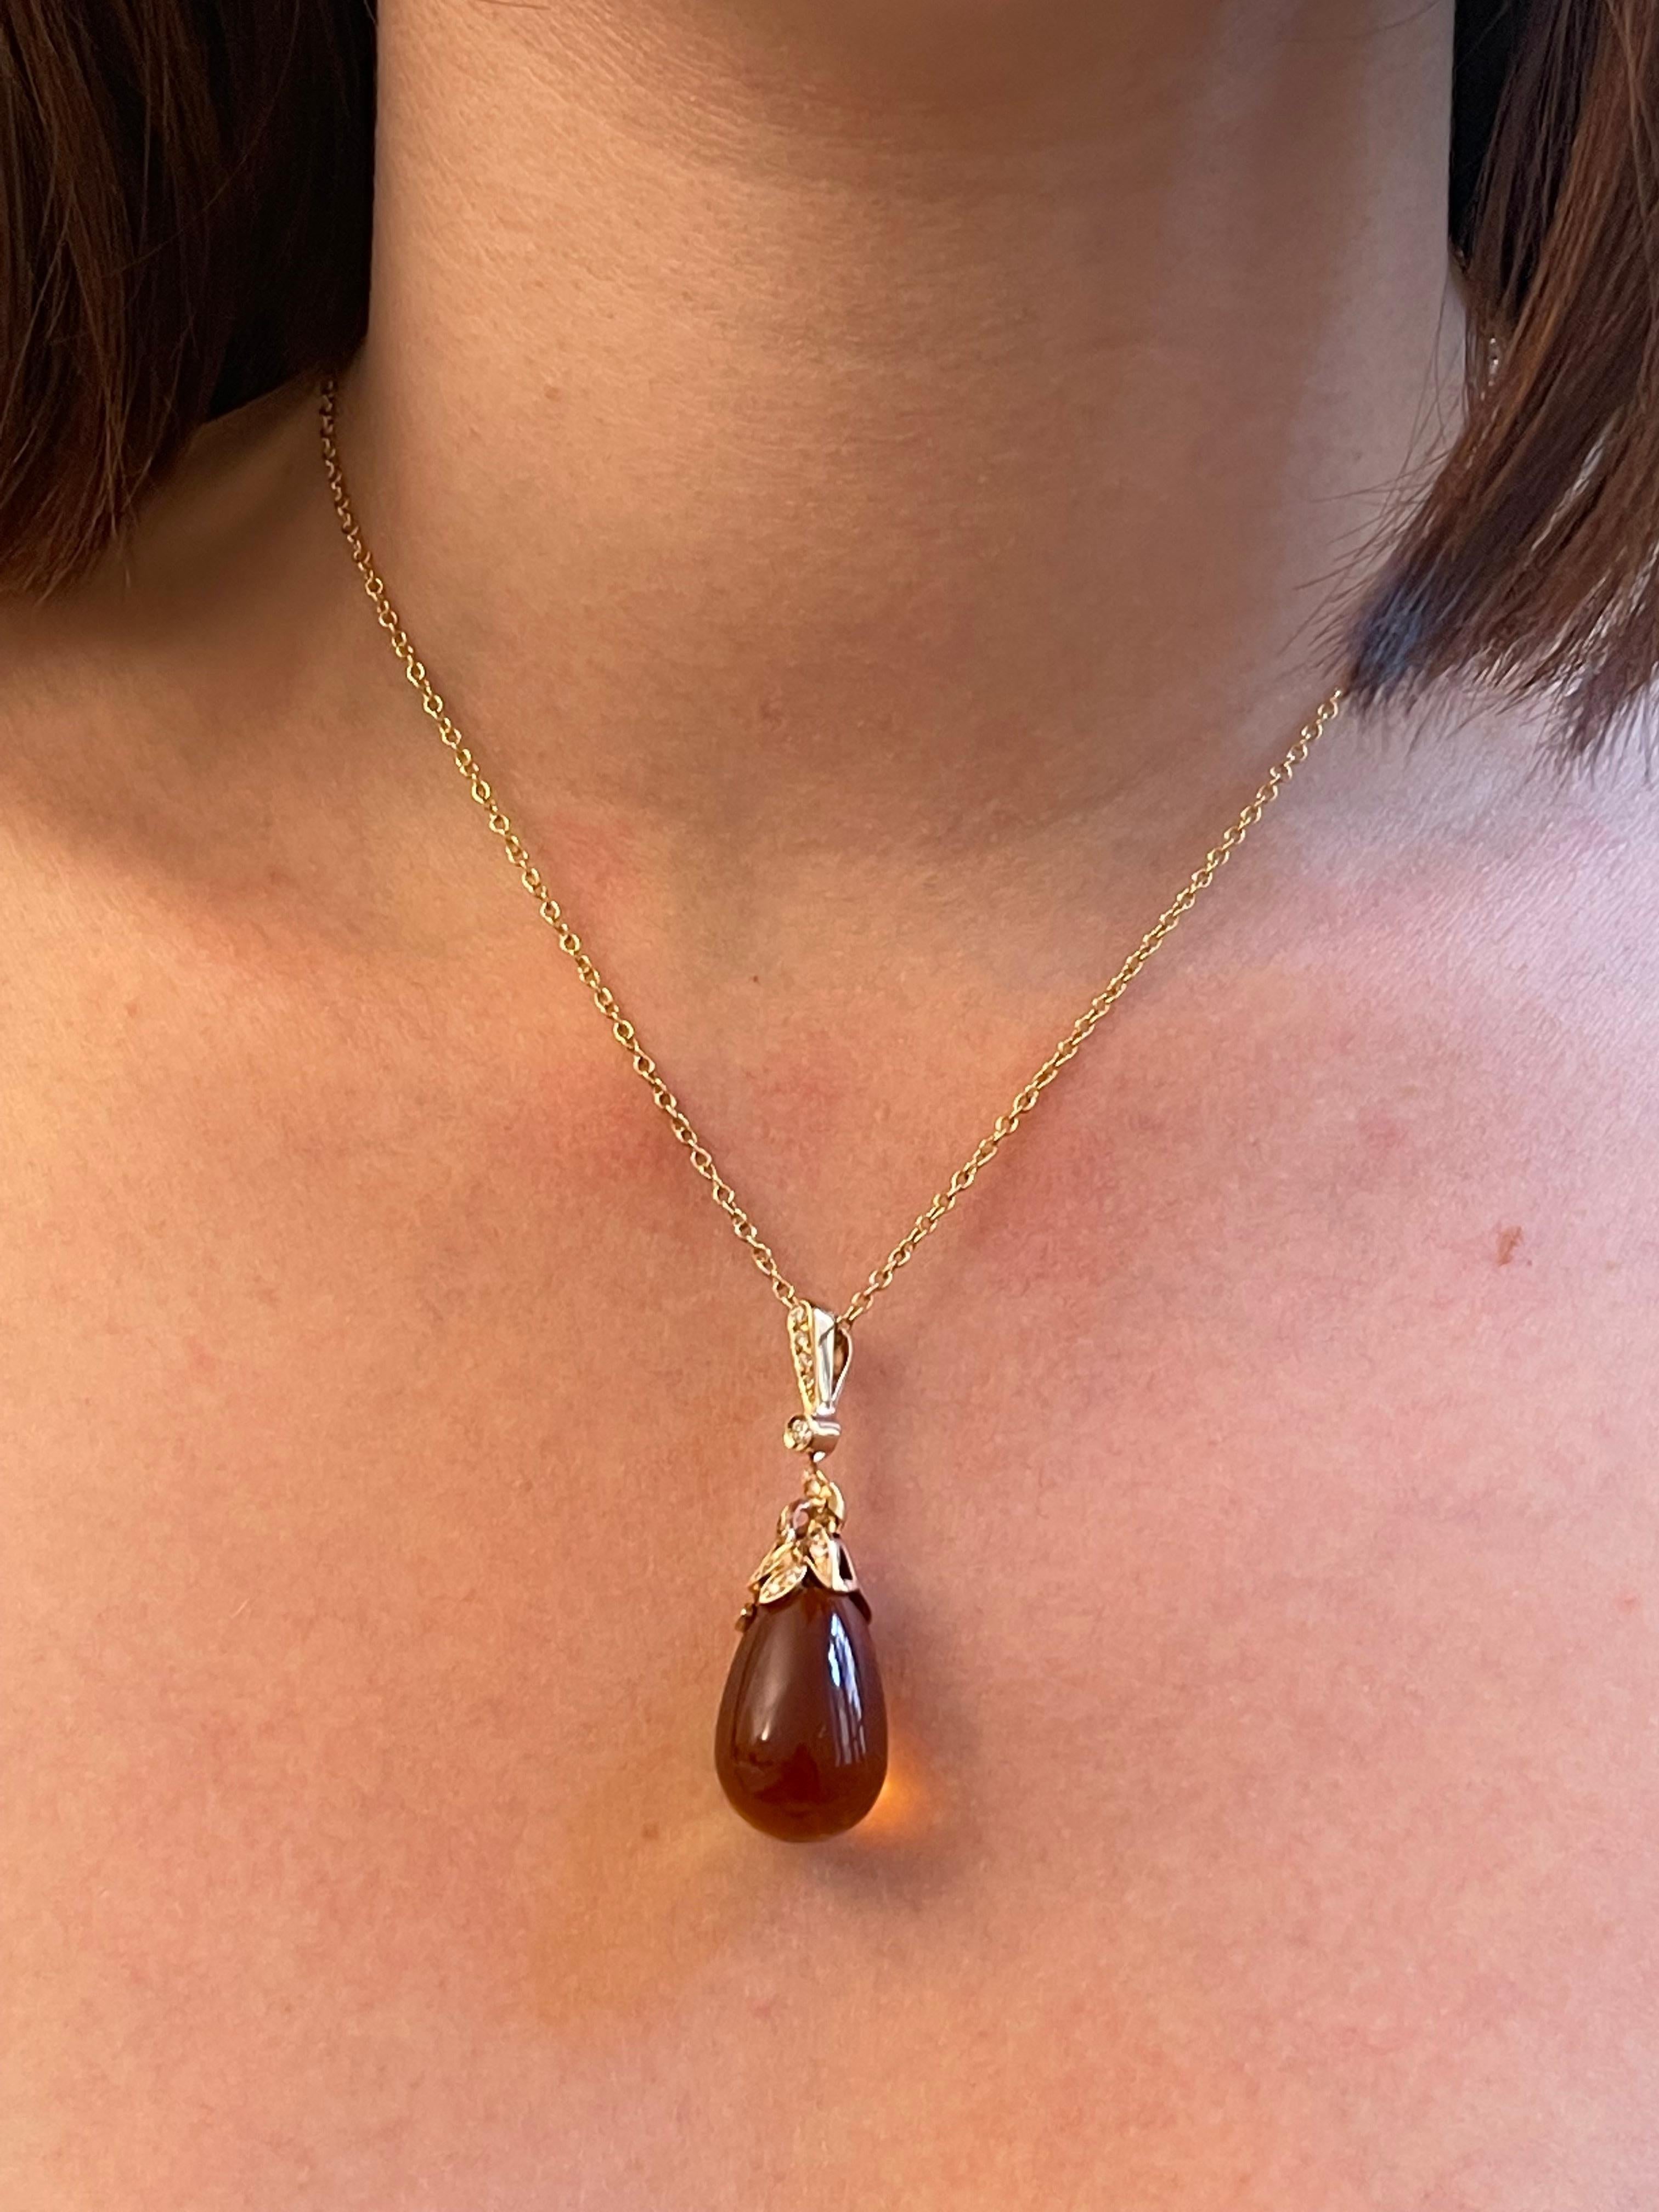 Pendant White Gold 18 K Gianni Lazzaro

Diamonds 21-0,36 ct HSI 
Citrine 1-37,27ct.

With a heritage of ancient fine Swiss jewelry traditions, NATKINA is a Geneva-based jewelry brand that creates modern jewelry masterpieces suitable for everyday